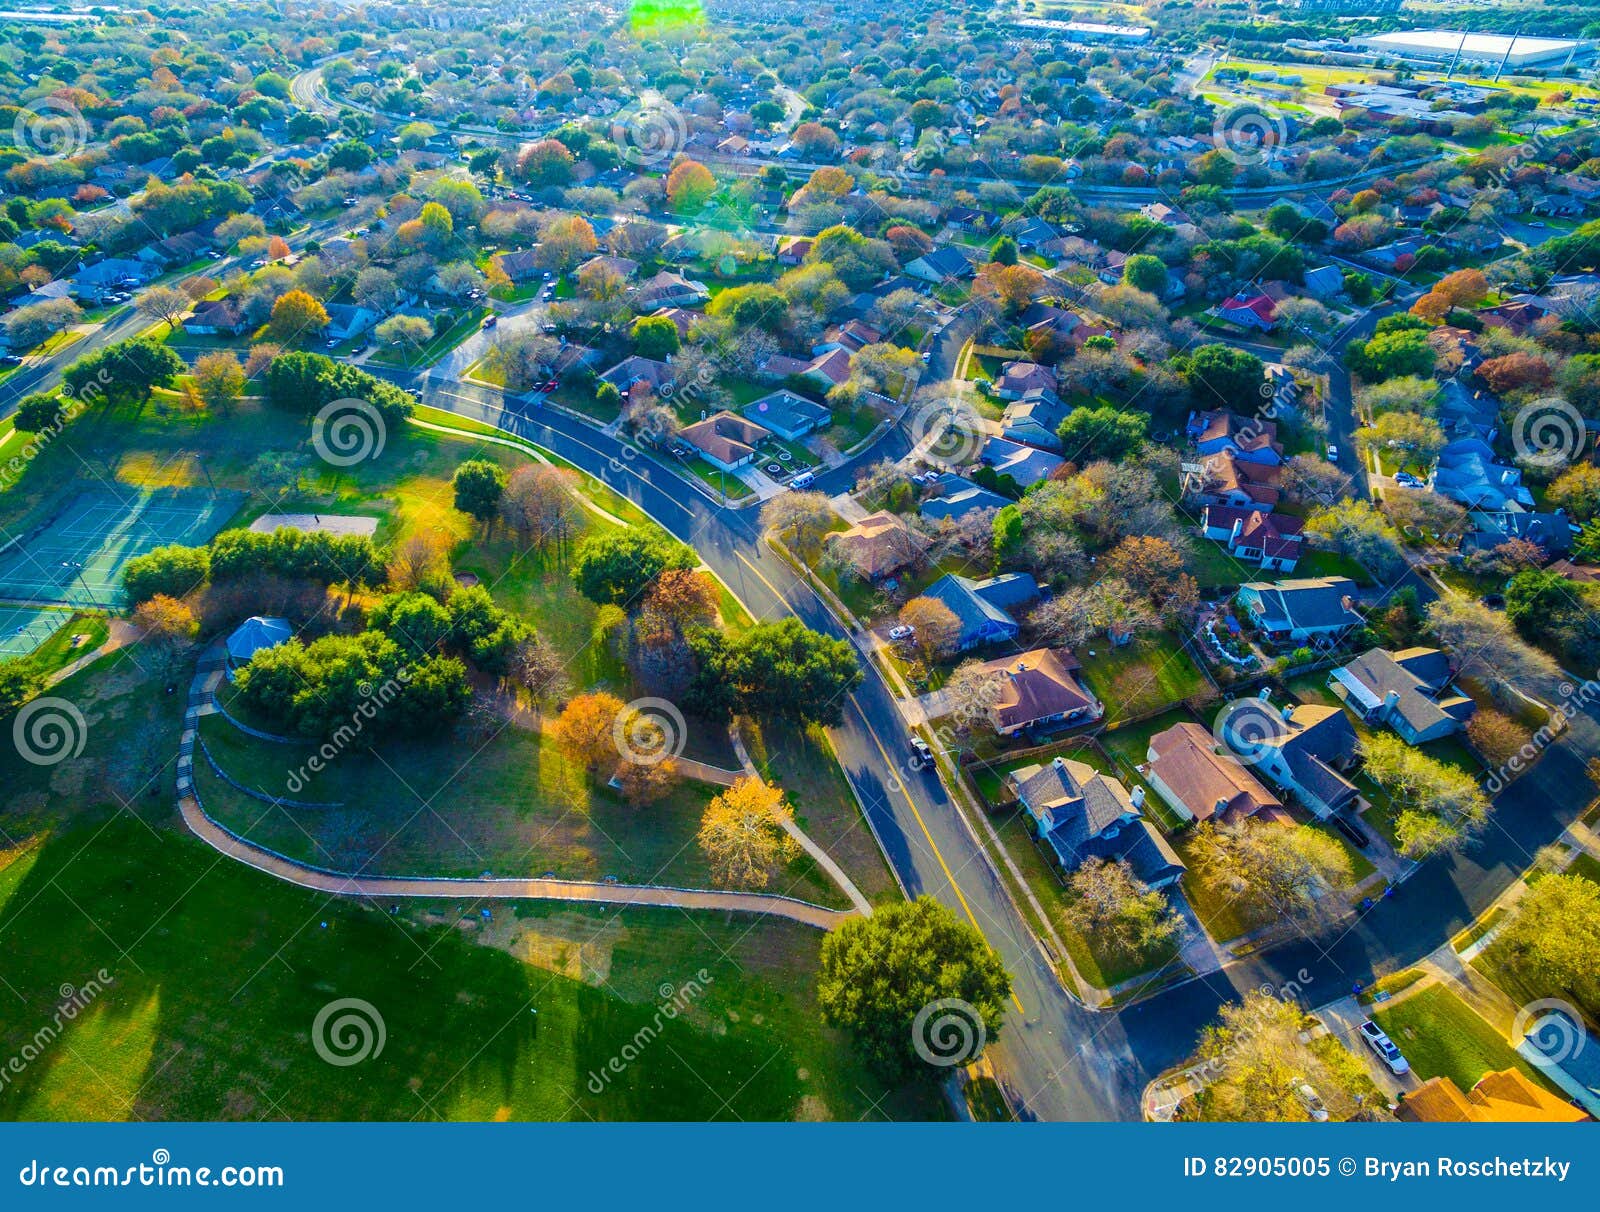 country side suburb homes austin texas aerial drone shot above community with hiking trails